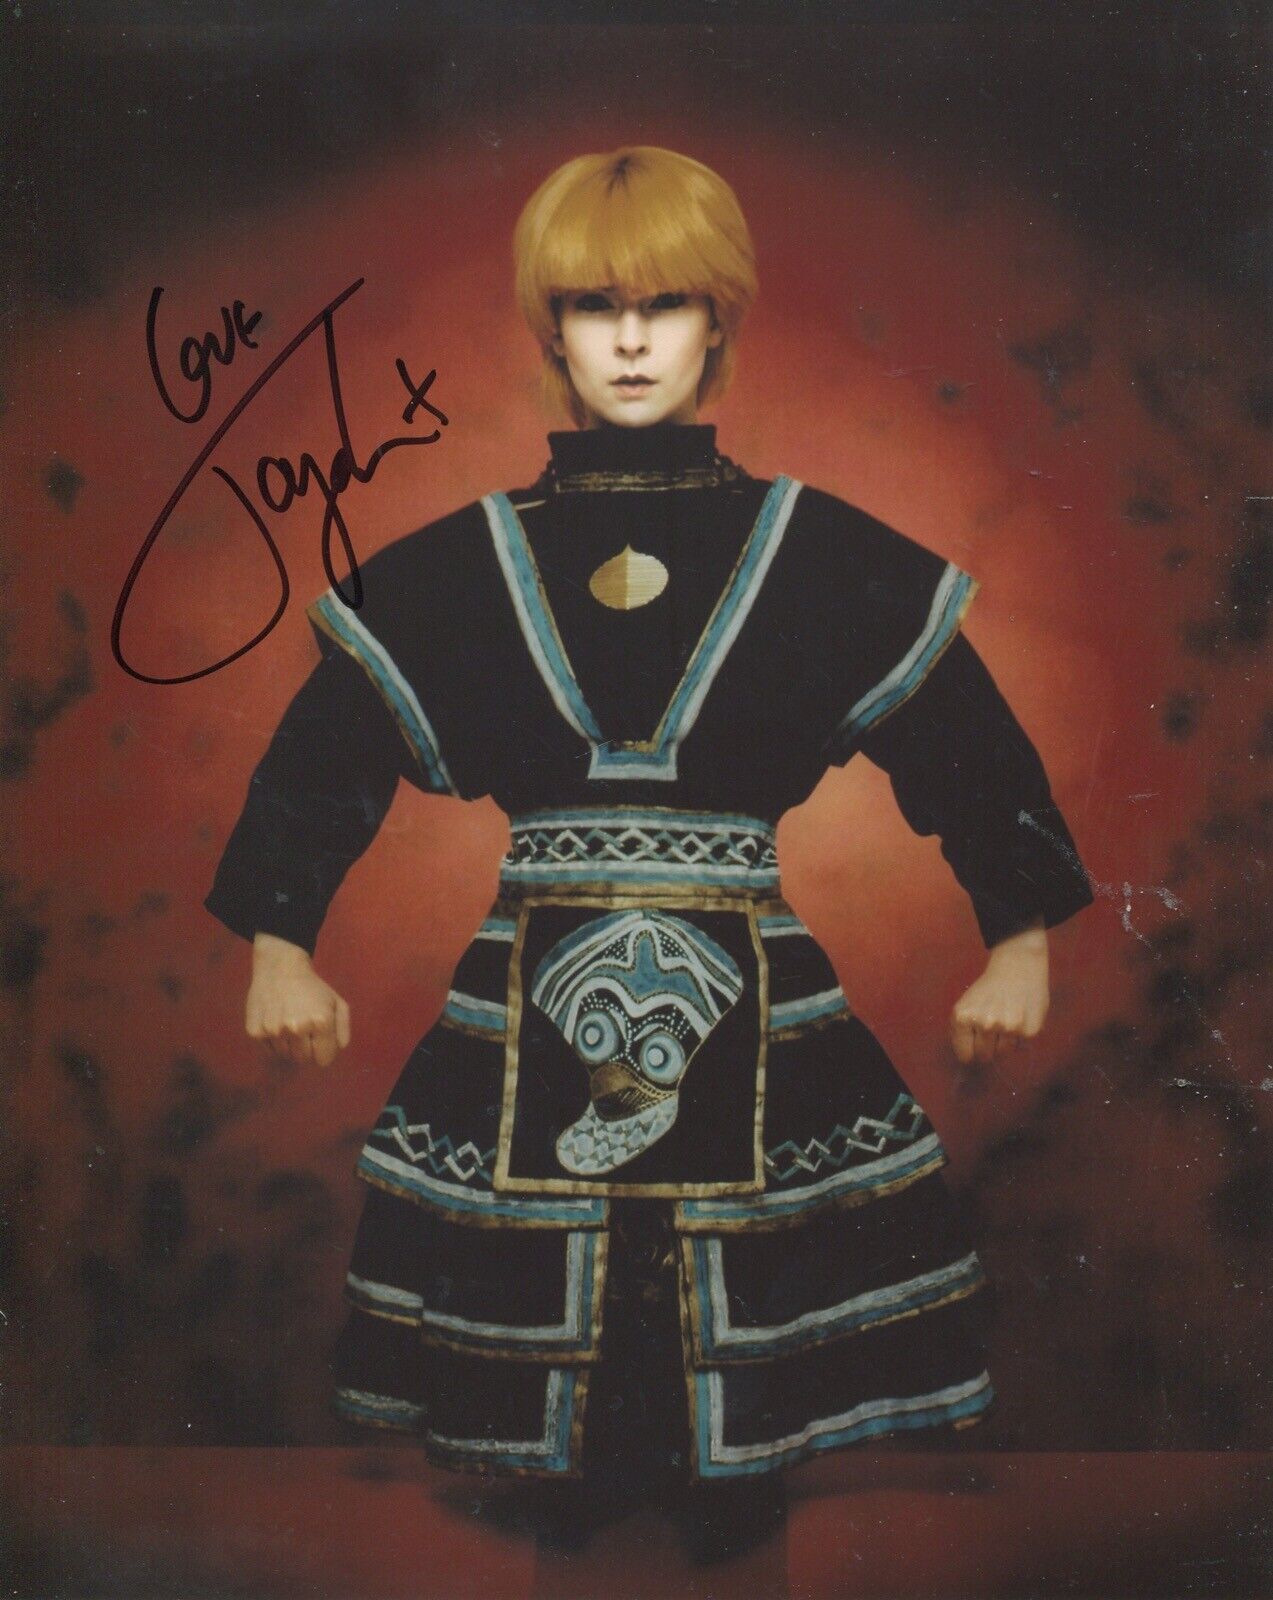 Pop & Punk star TOYAH signed 8x10 Photo Poster painting - IMAGE No17